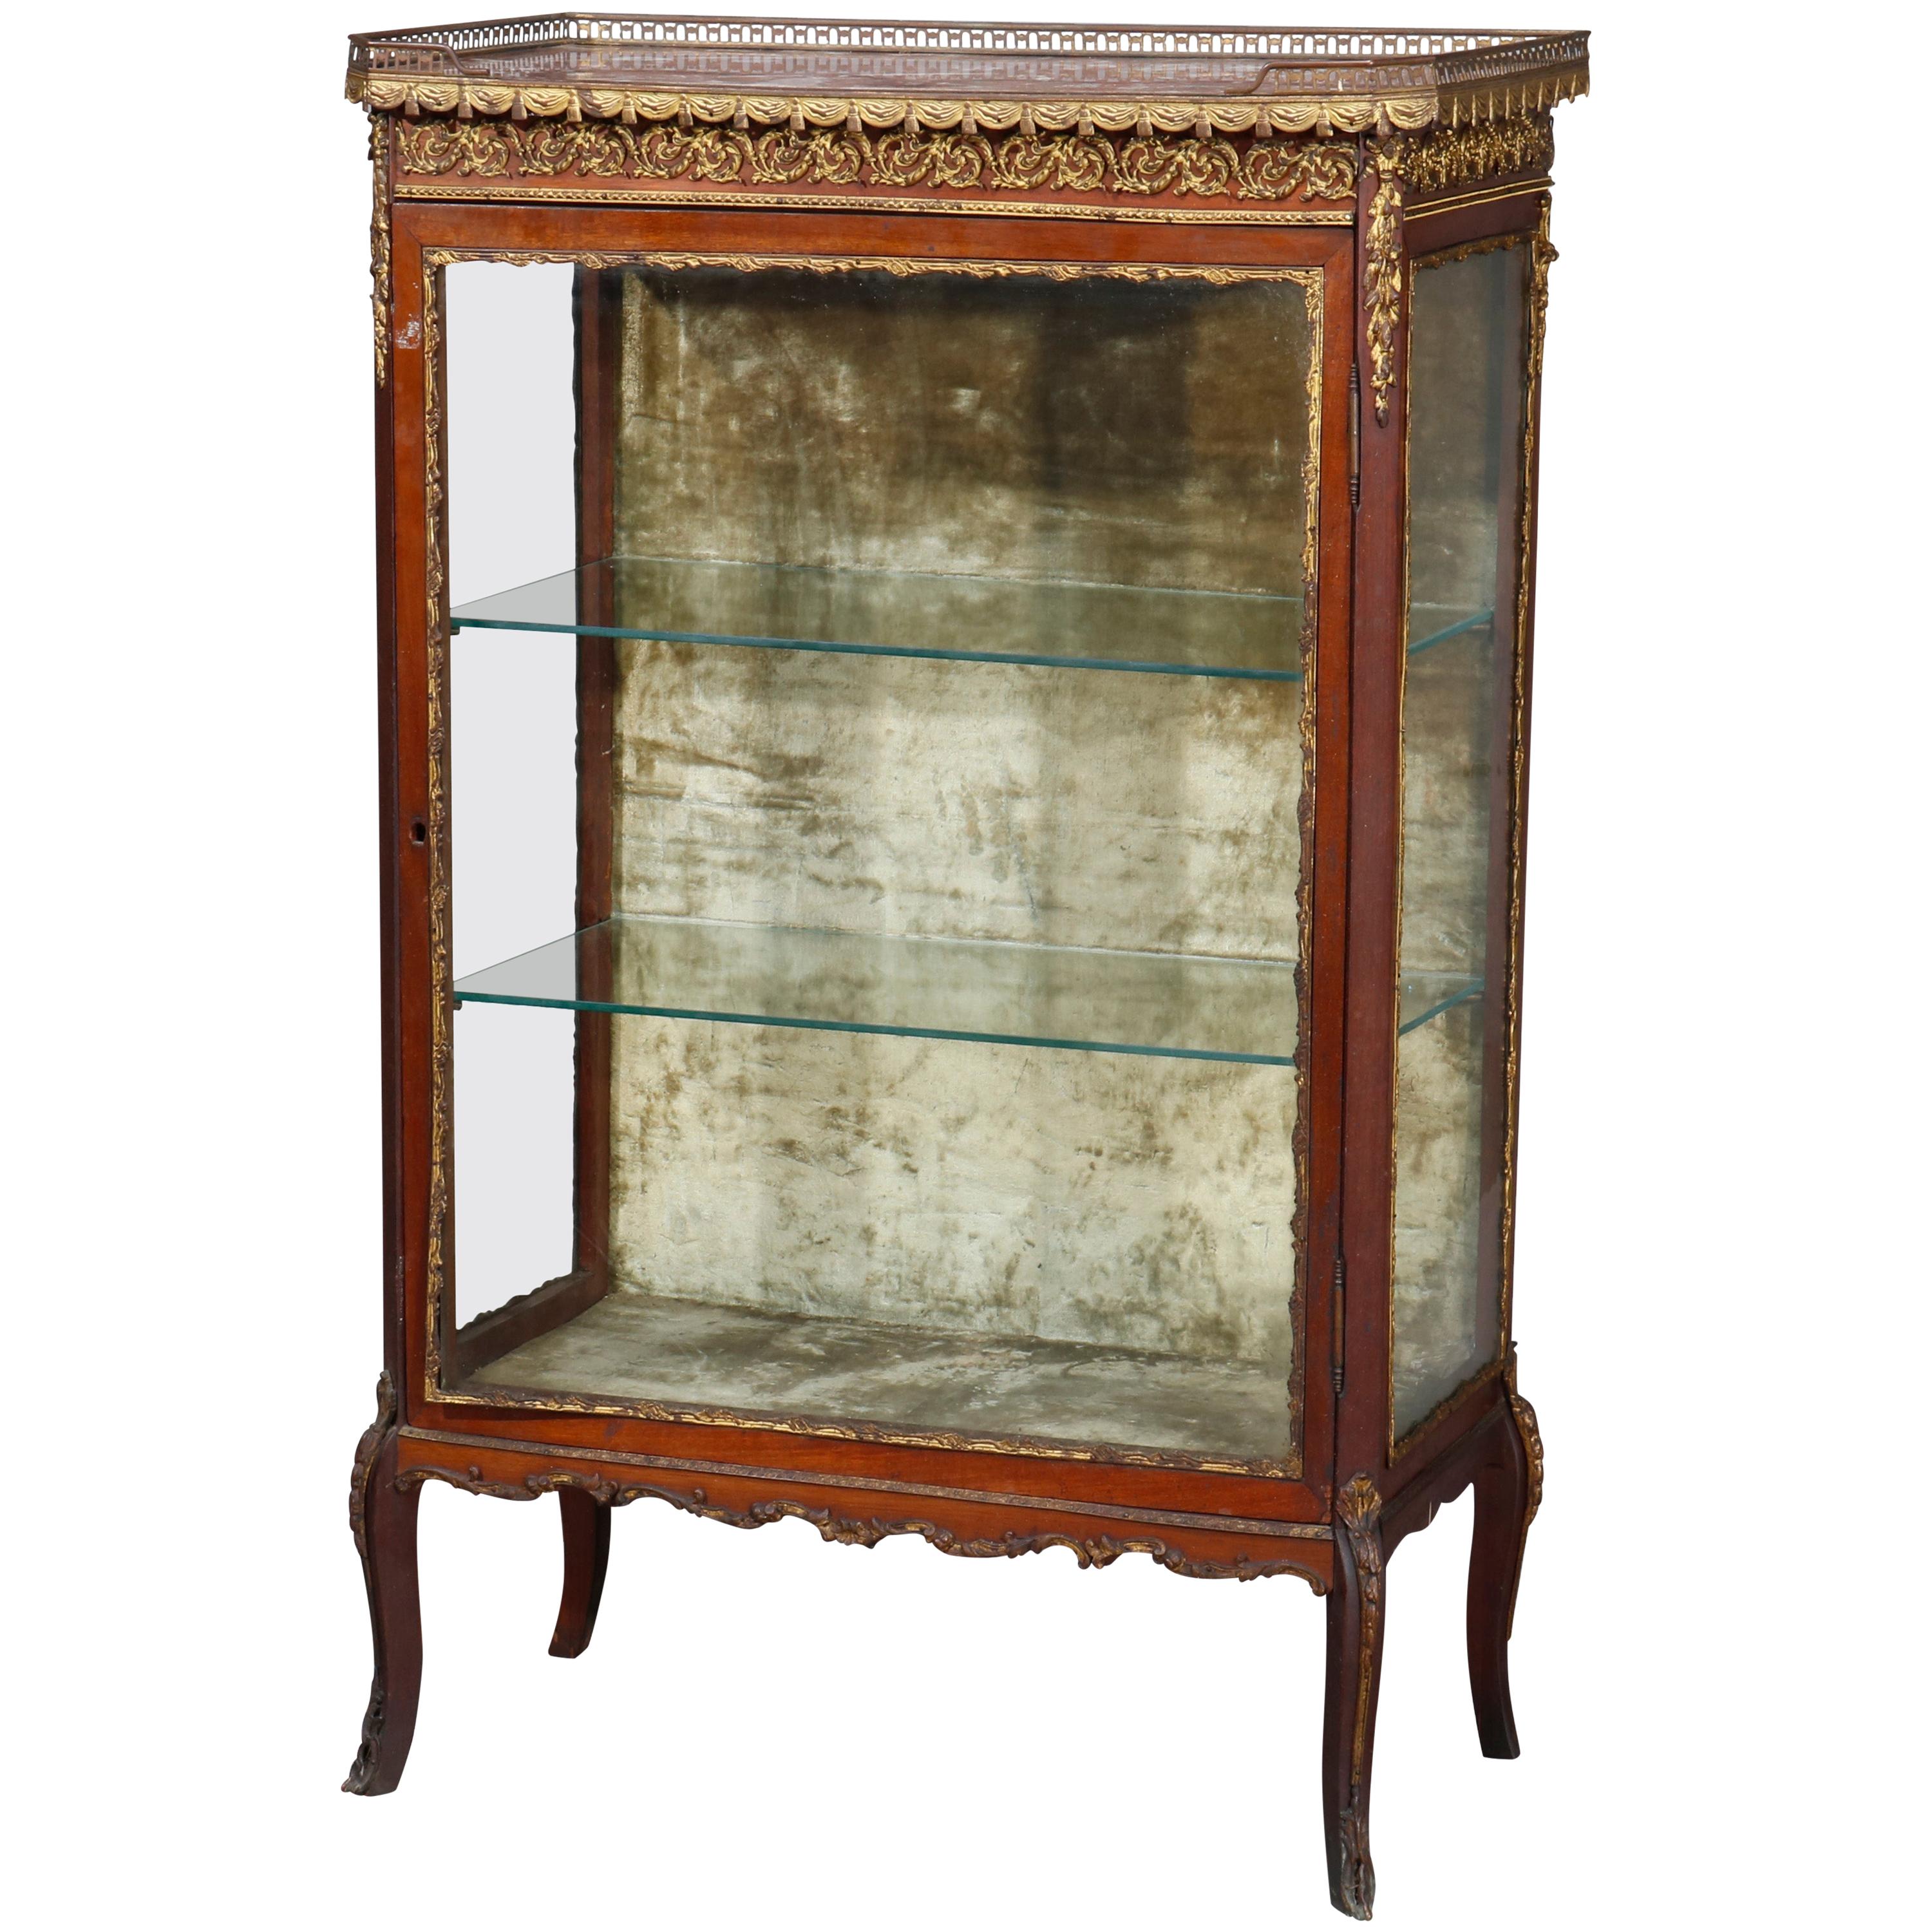 Antique French Louis XV Rosewood, Marble and Bronze Ormolu Display Vitrine